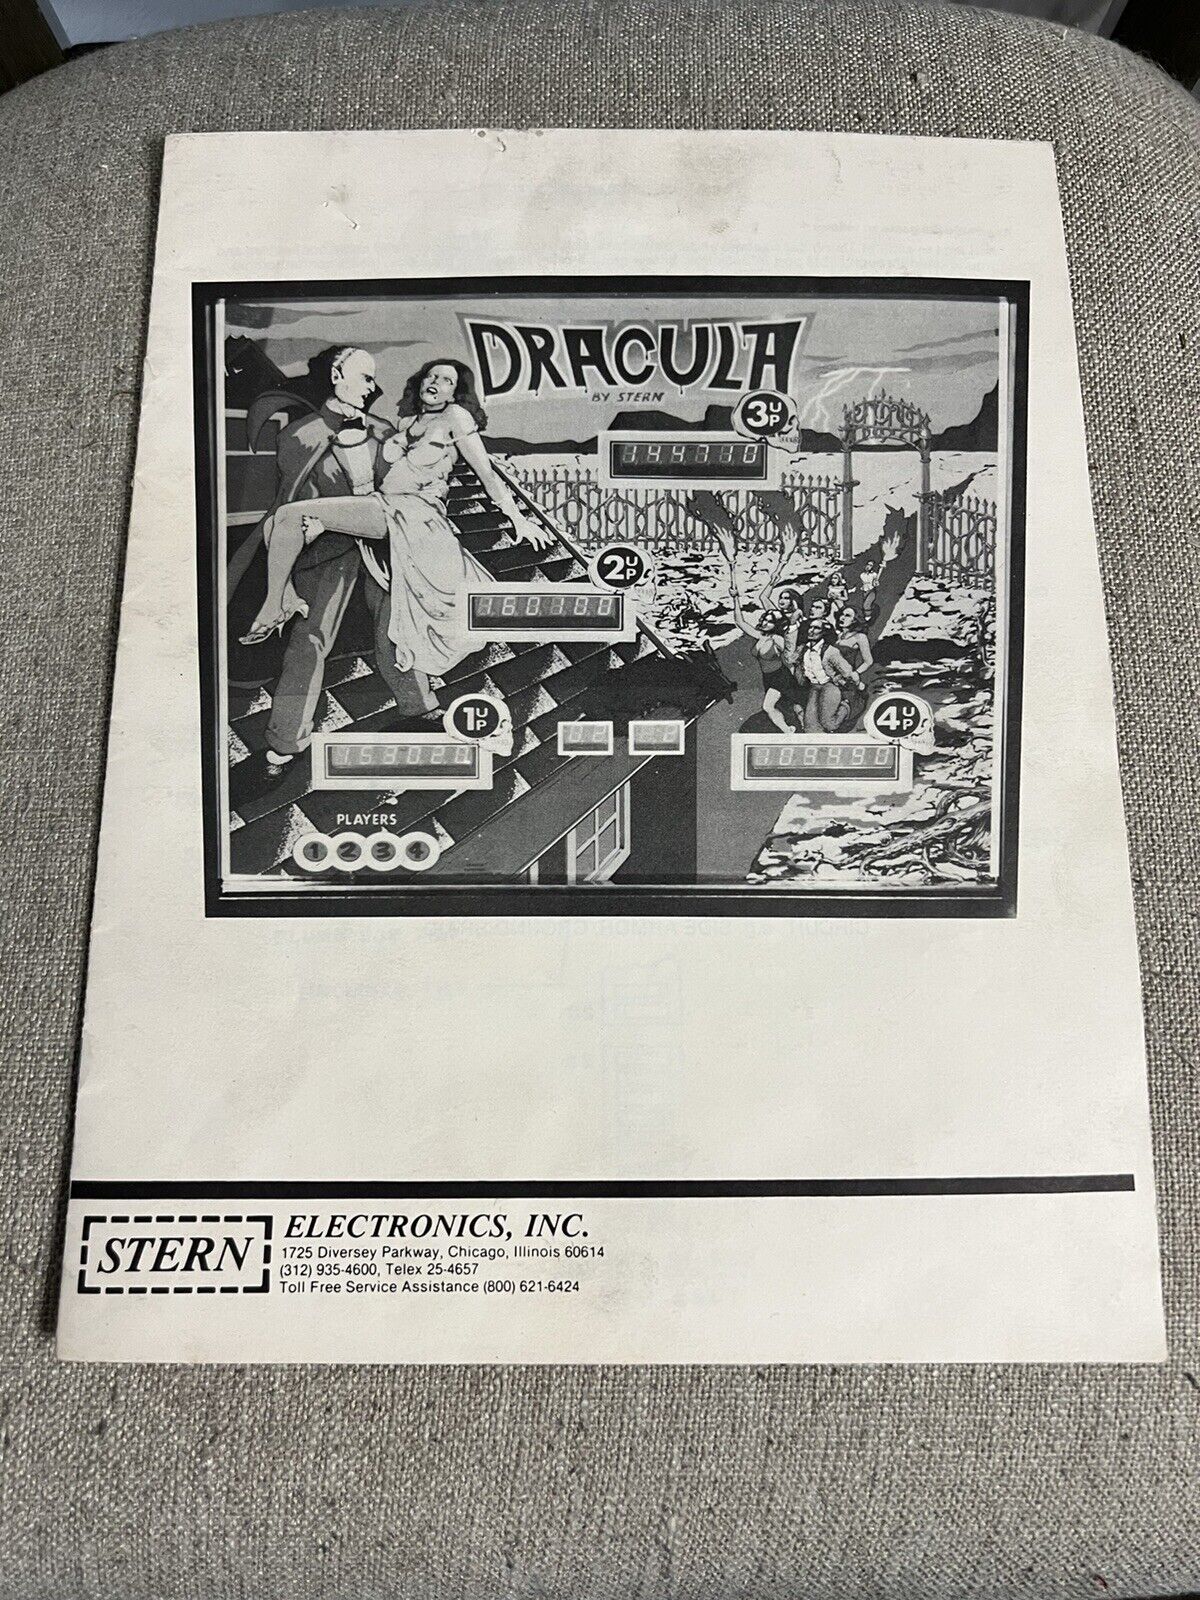 DRACULA PINBALL GAME MANUAL AND SCHEMATICS BY STERN